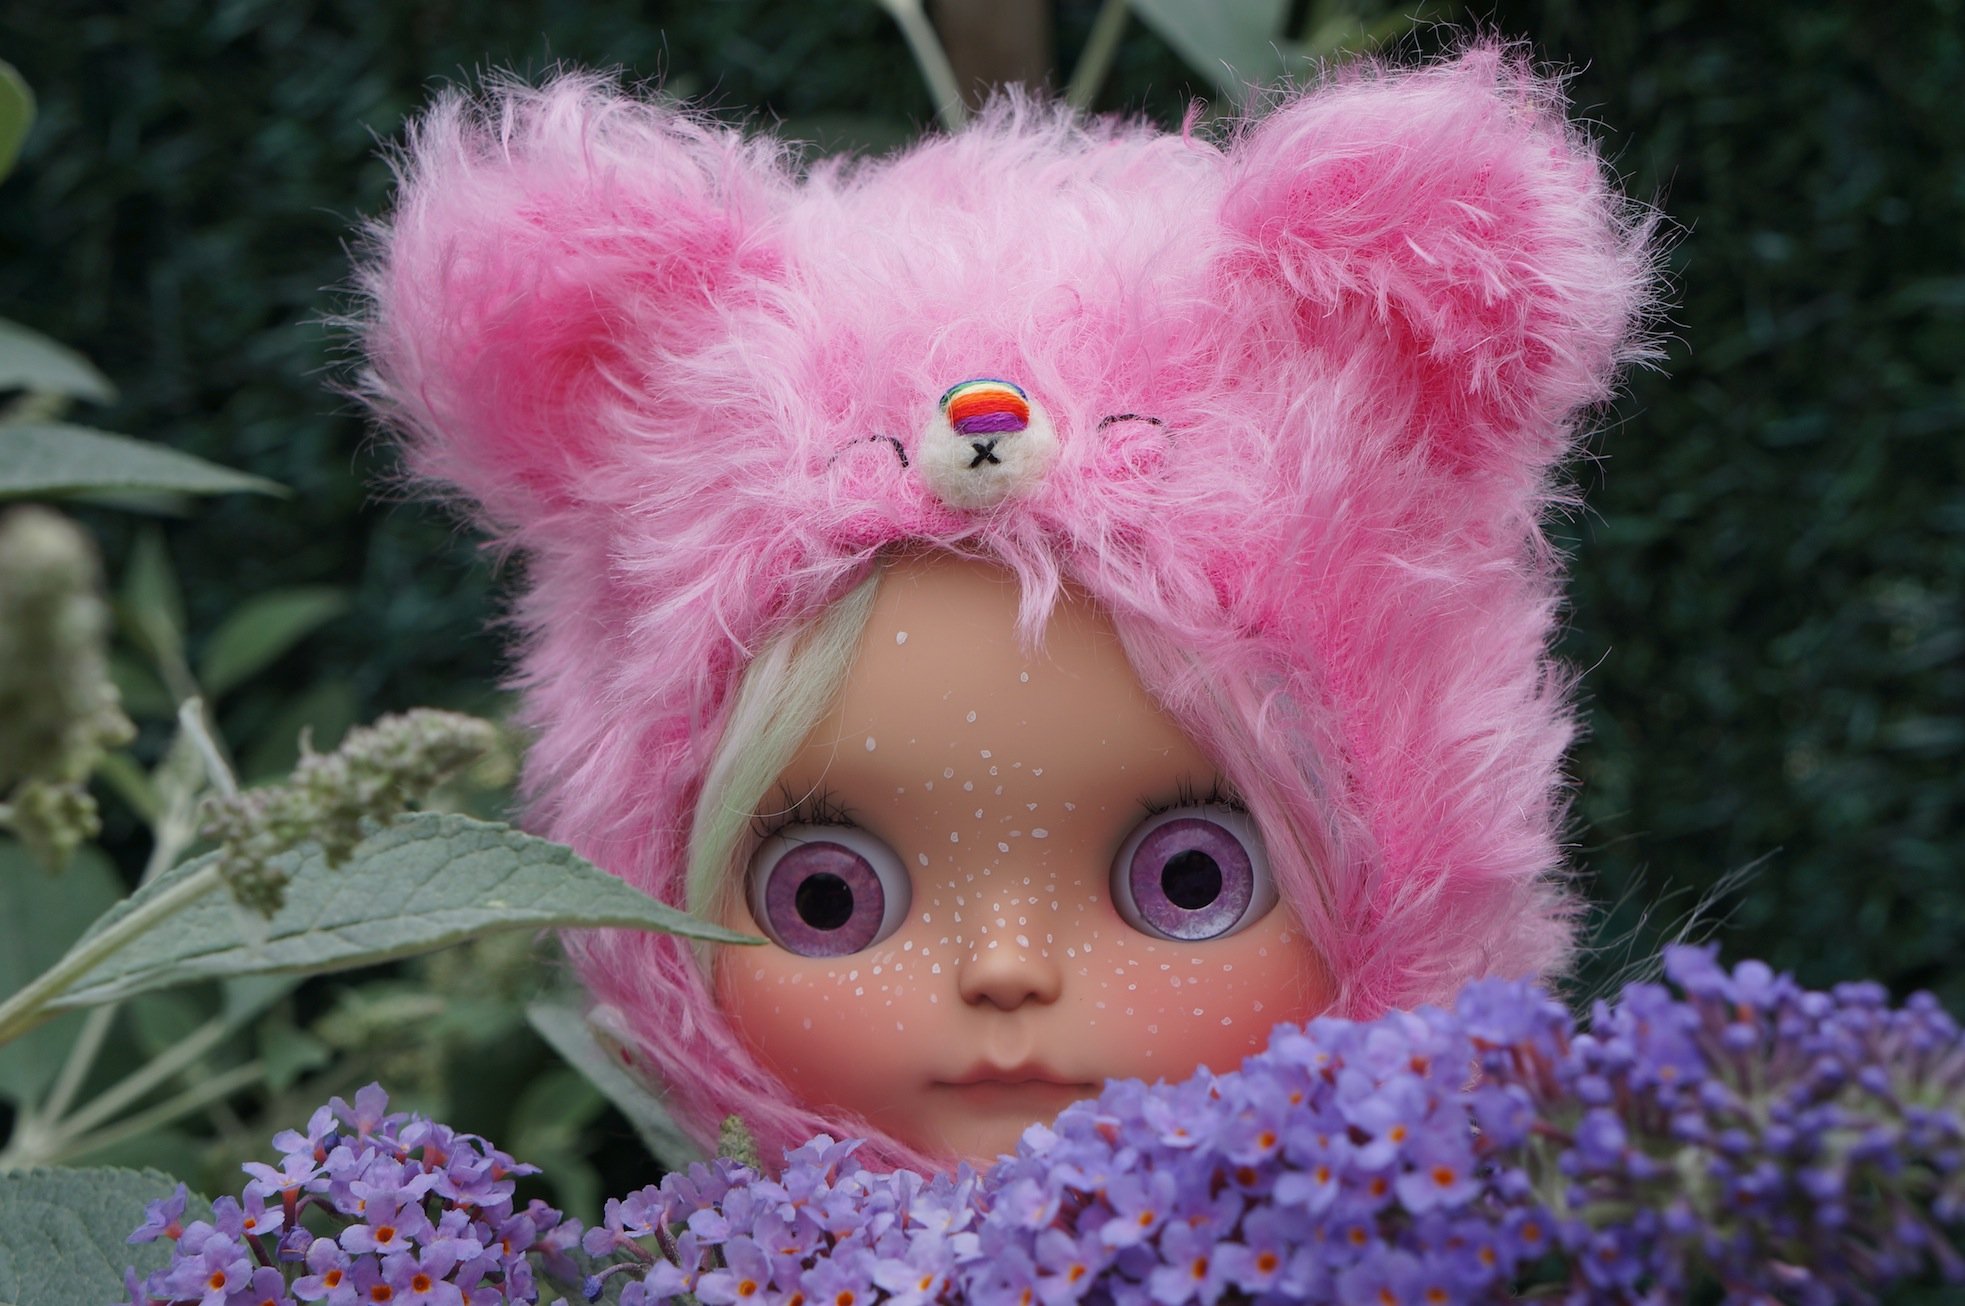 Wallpaper, pink, doll, flower, purple, stuffed toy, Toy, textile, snout, plush, whiskers, magenta 1965x1306